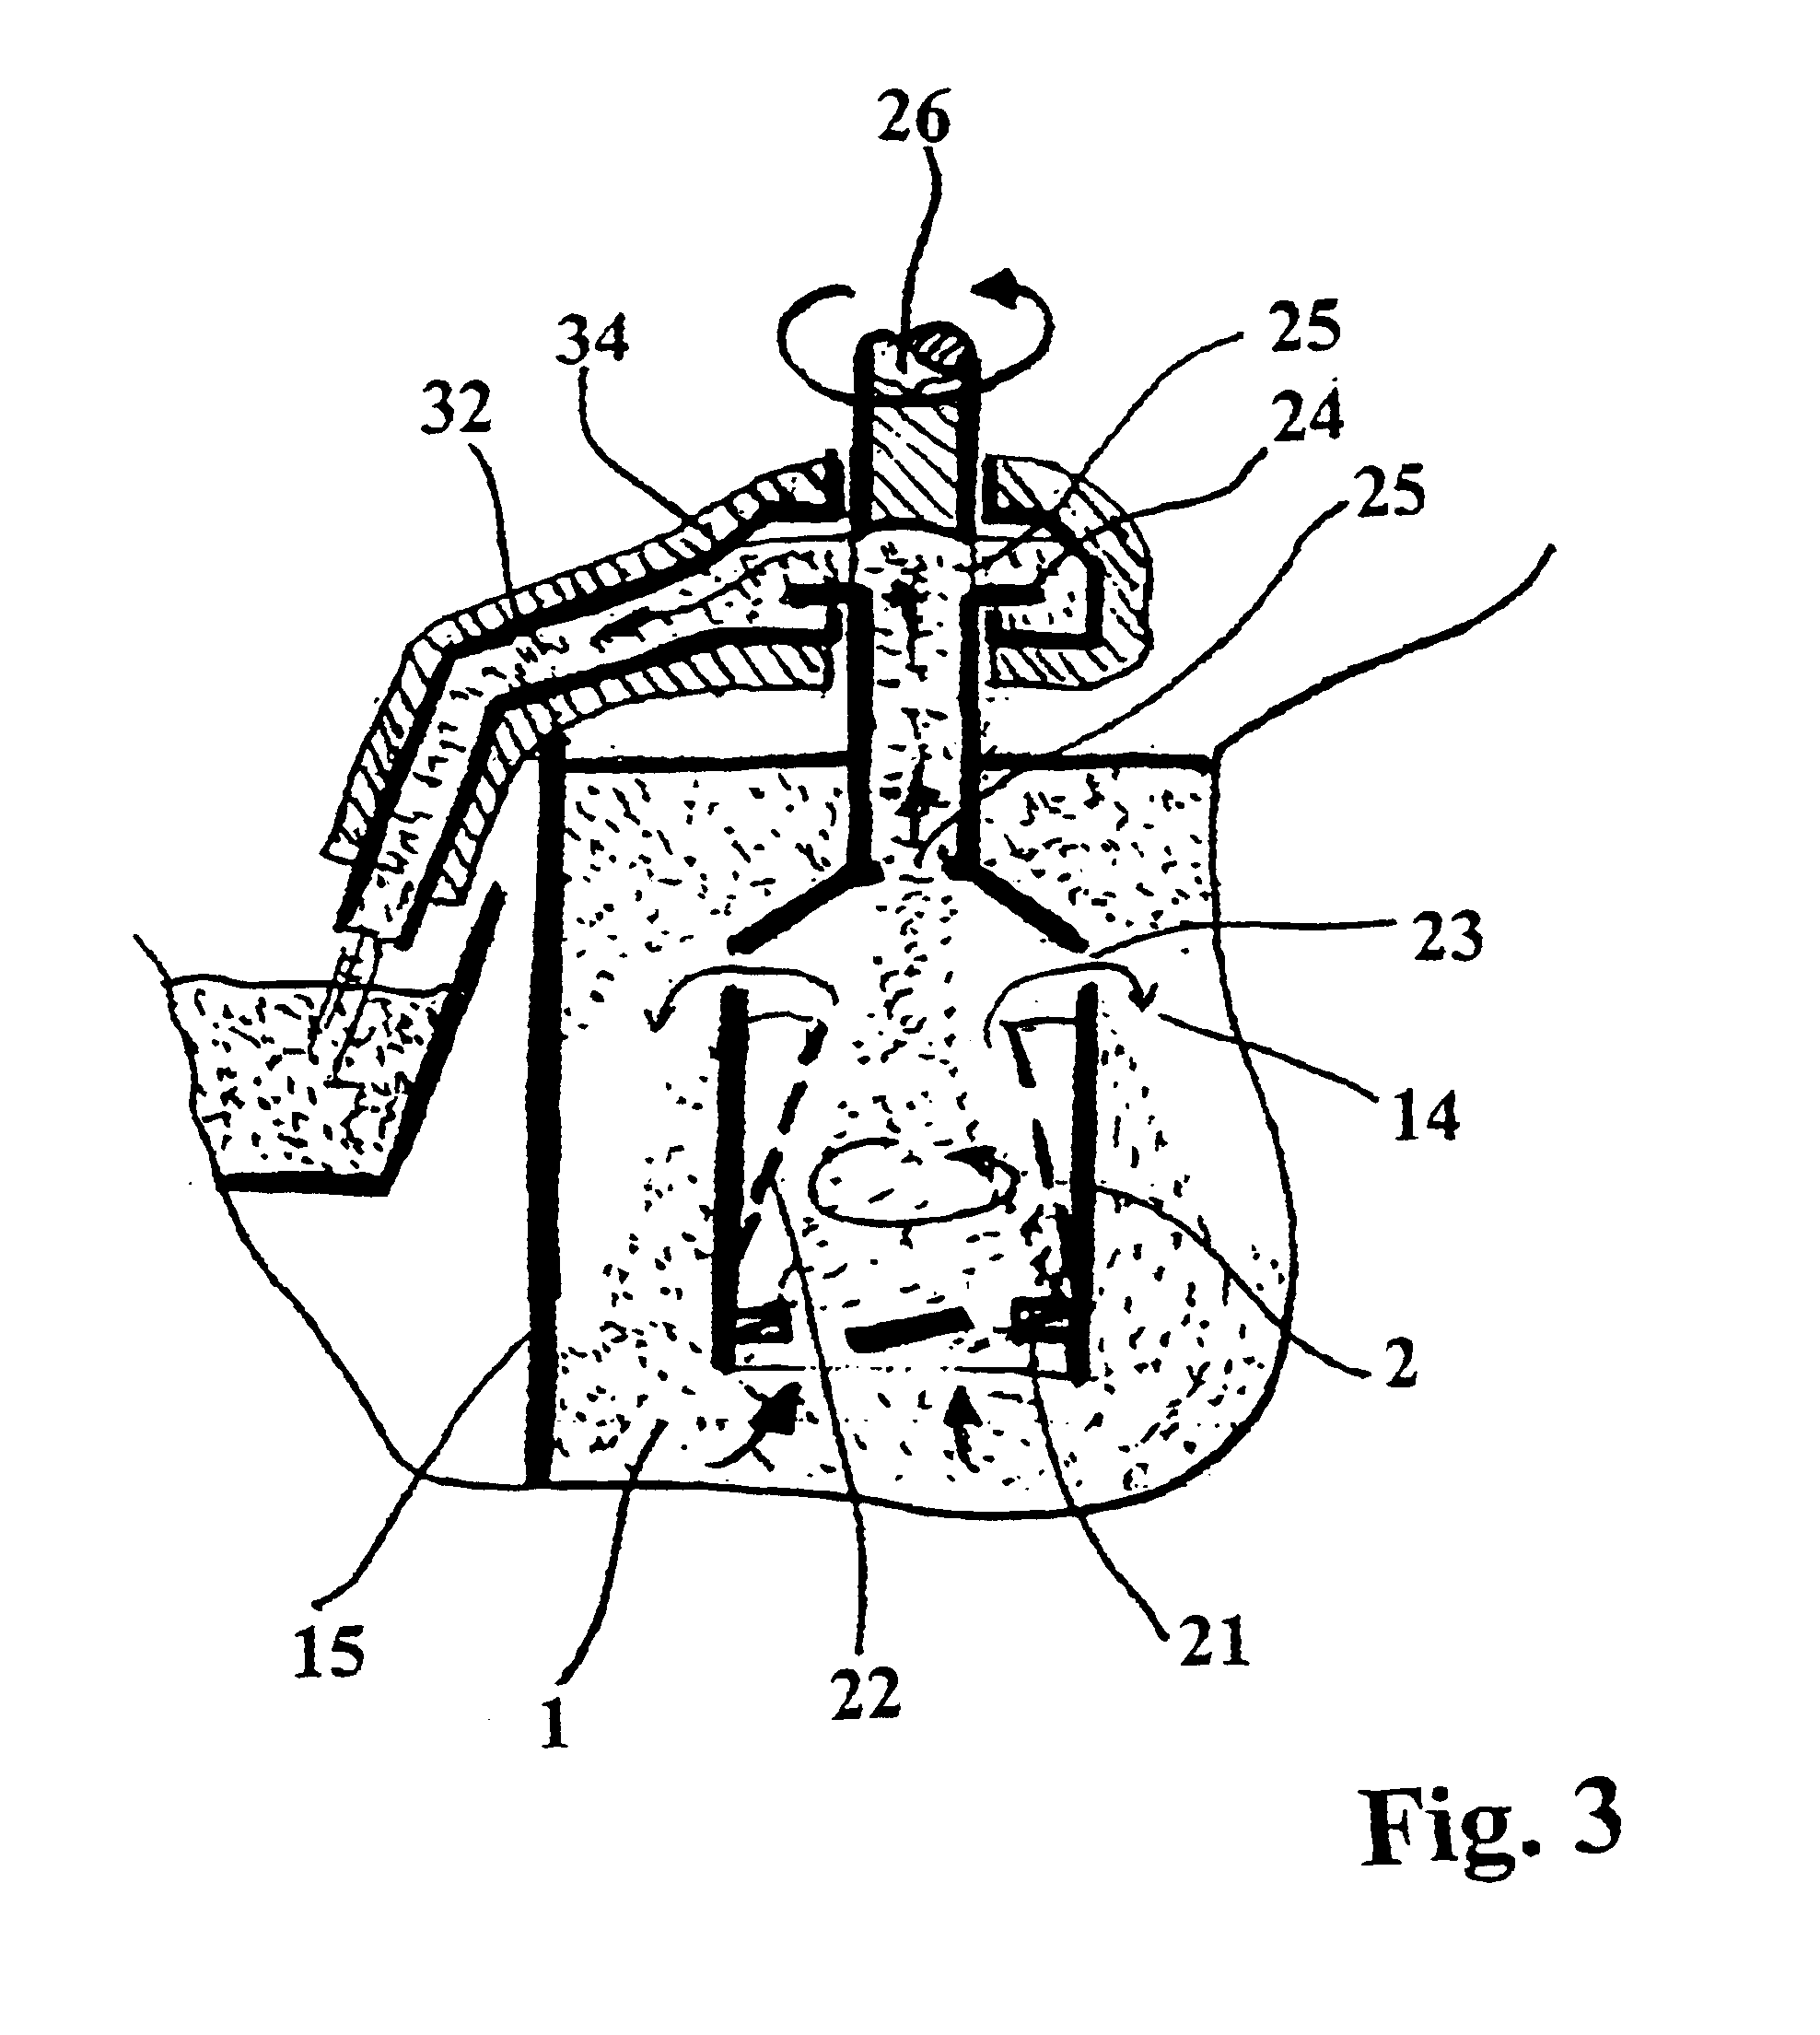 Process and device for precipitating compounds from zinc metal baths by means of a hollow rotary body that can be driven about an axis and is dipped into the molten zinc